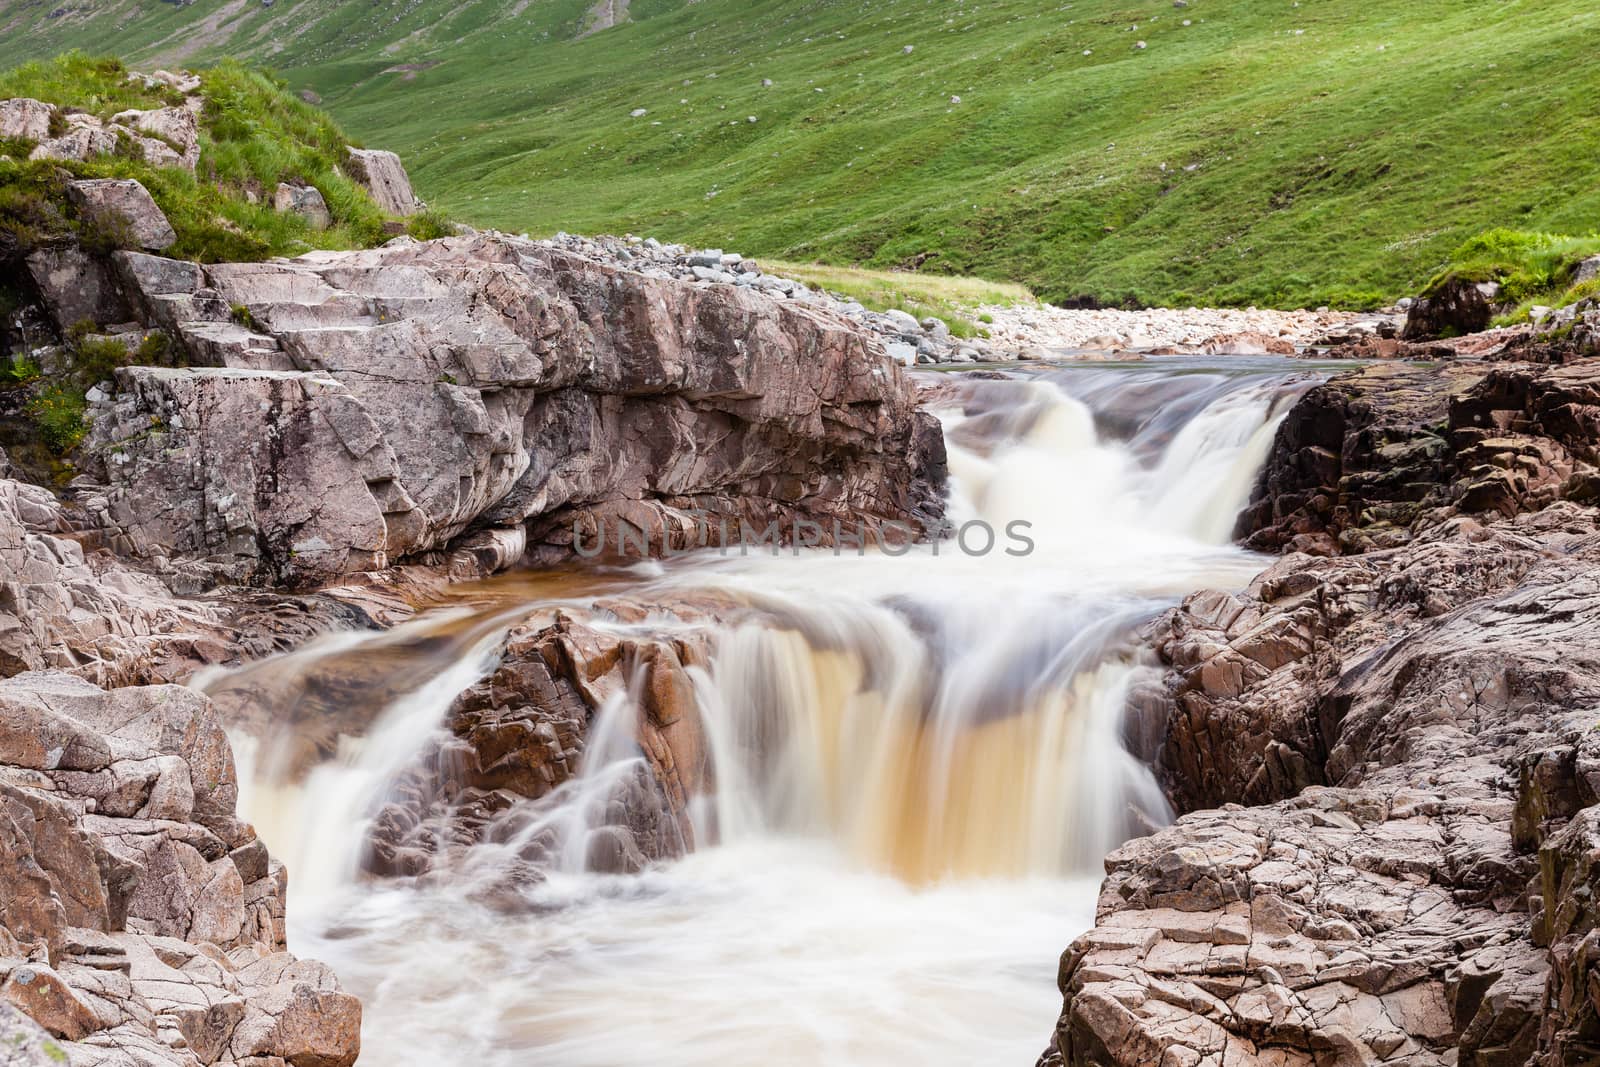 Water cascades down the River Etive in Glen Etive in the Scottish highlands.